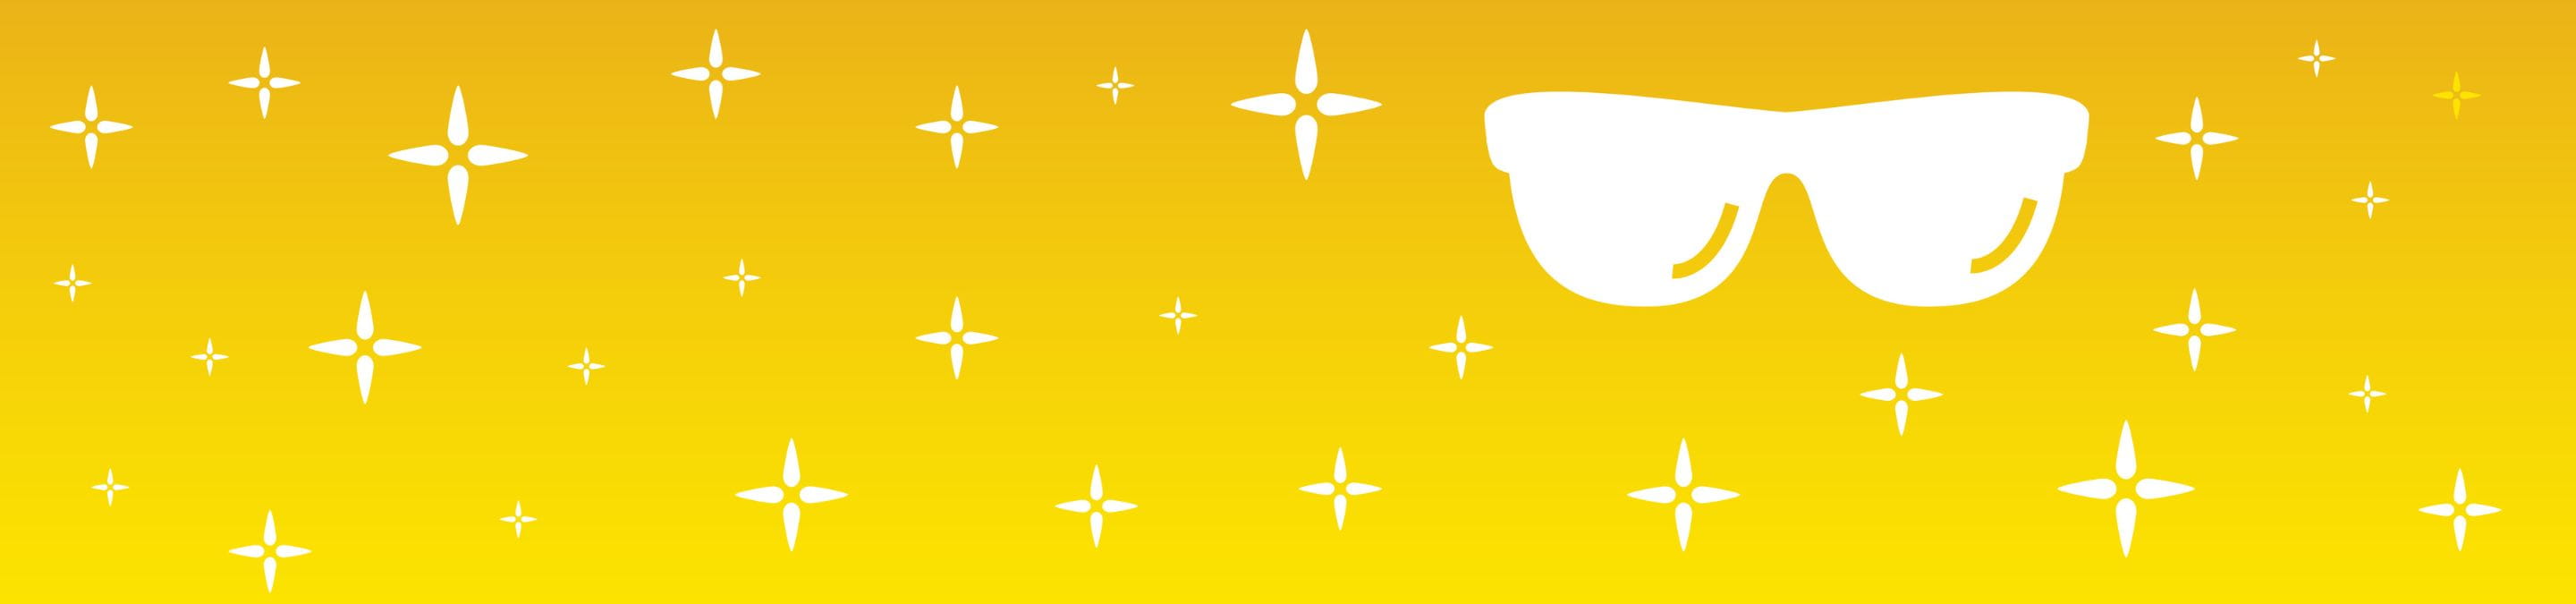 a yellow background with white star shapes and a pair of white sunglasses in the top right corner